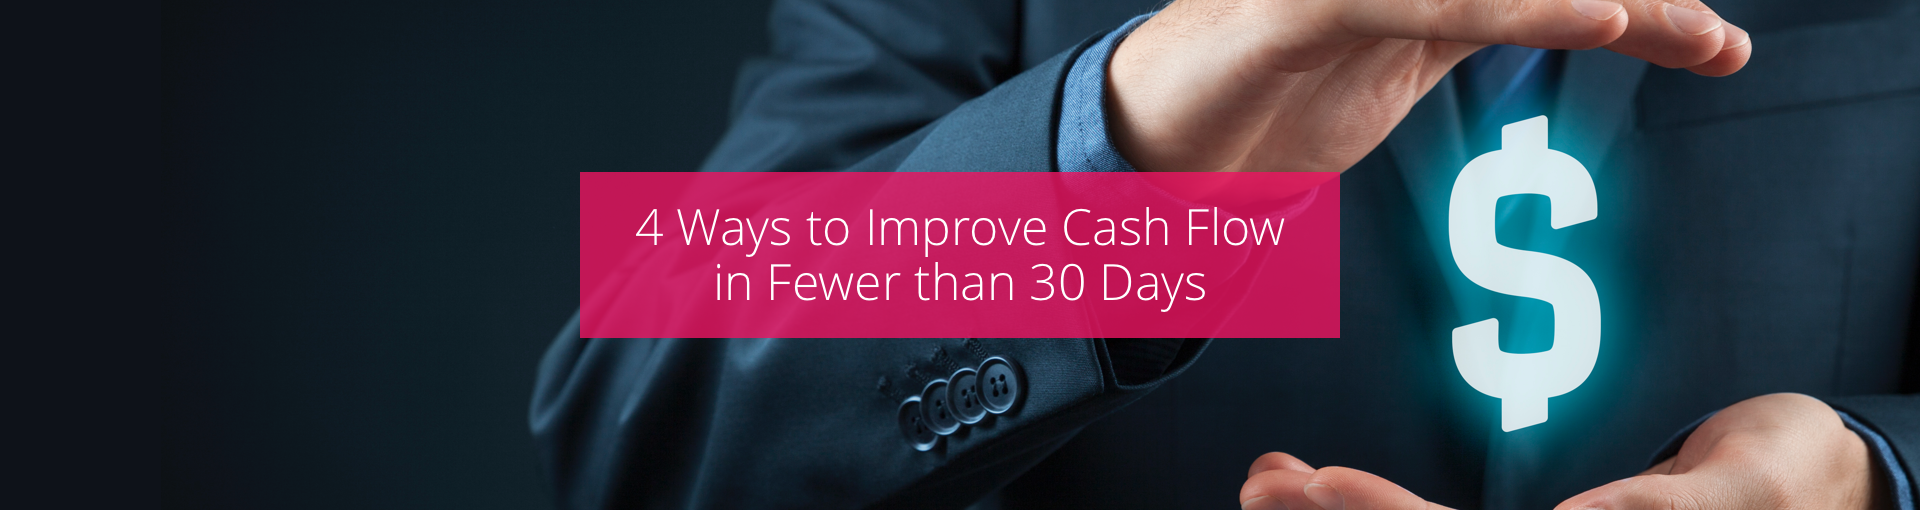 4 Ways to Improve Cash Flow in Fewer than 30 Days Featured Image